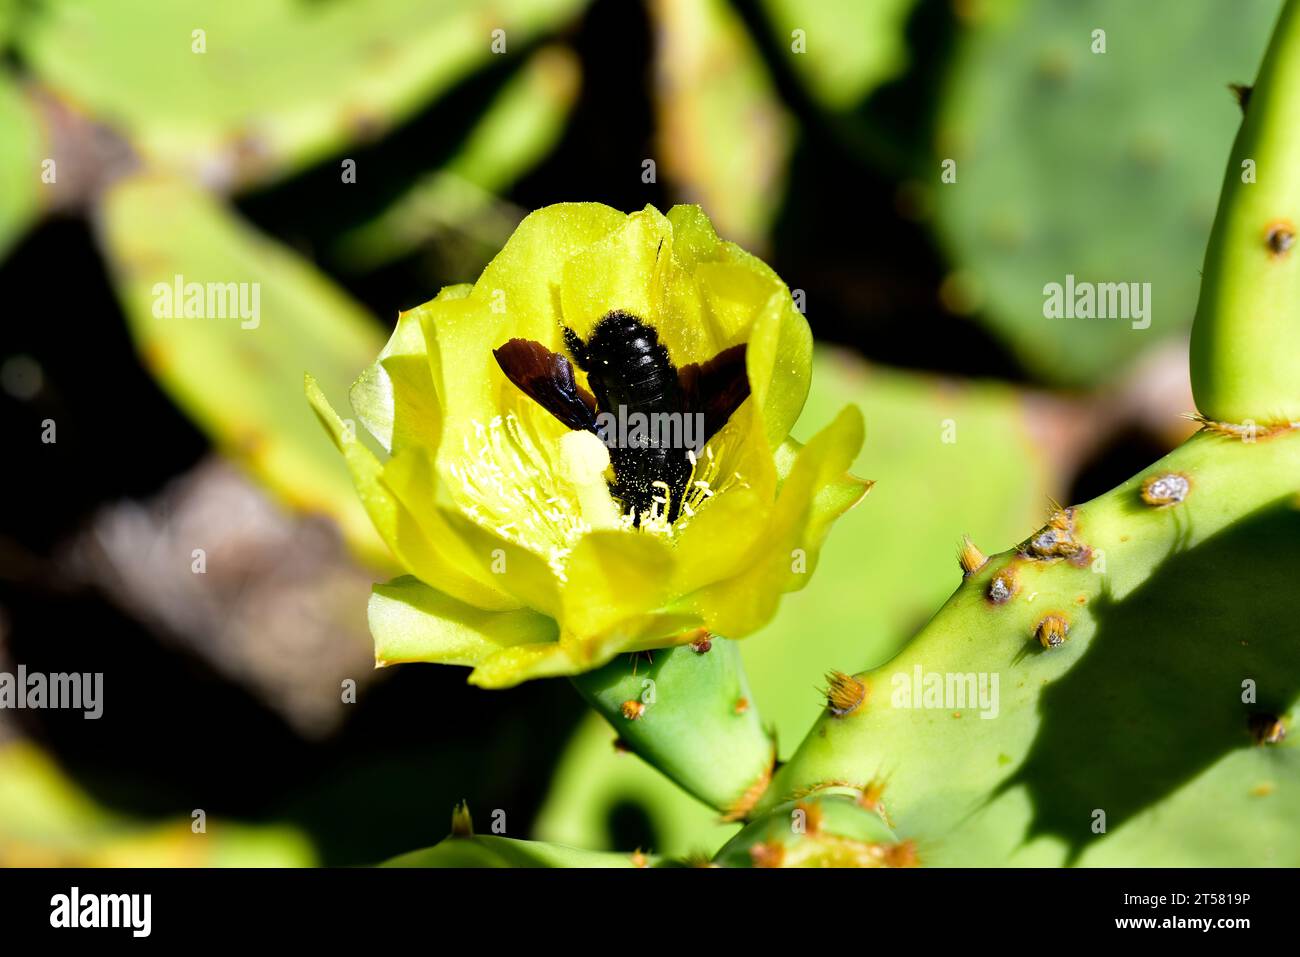 Tuna india (Opuntia dillenii) is a cactus native to Mexico, Central America and Caribe and naturalized in temperate regions of Europe. Flower detail w Stock Photo